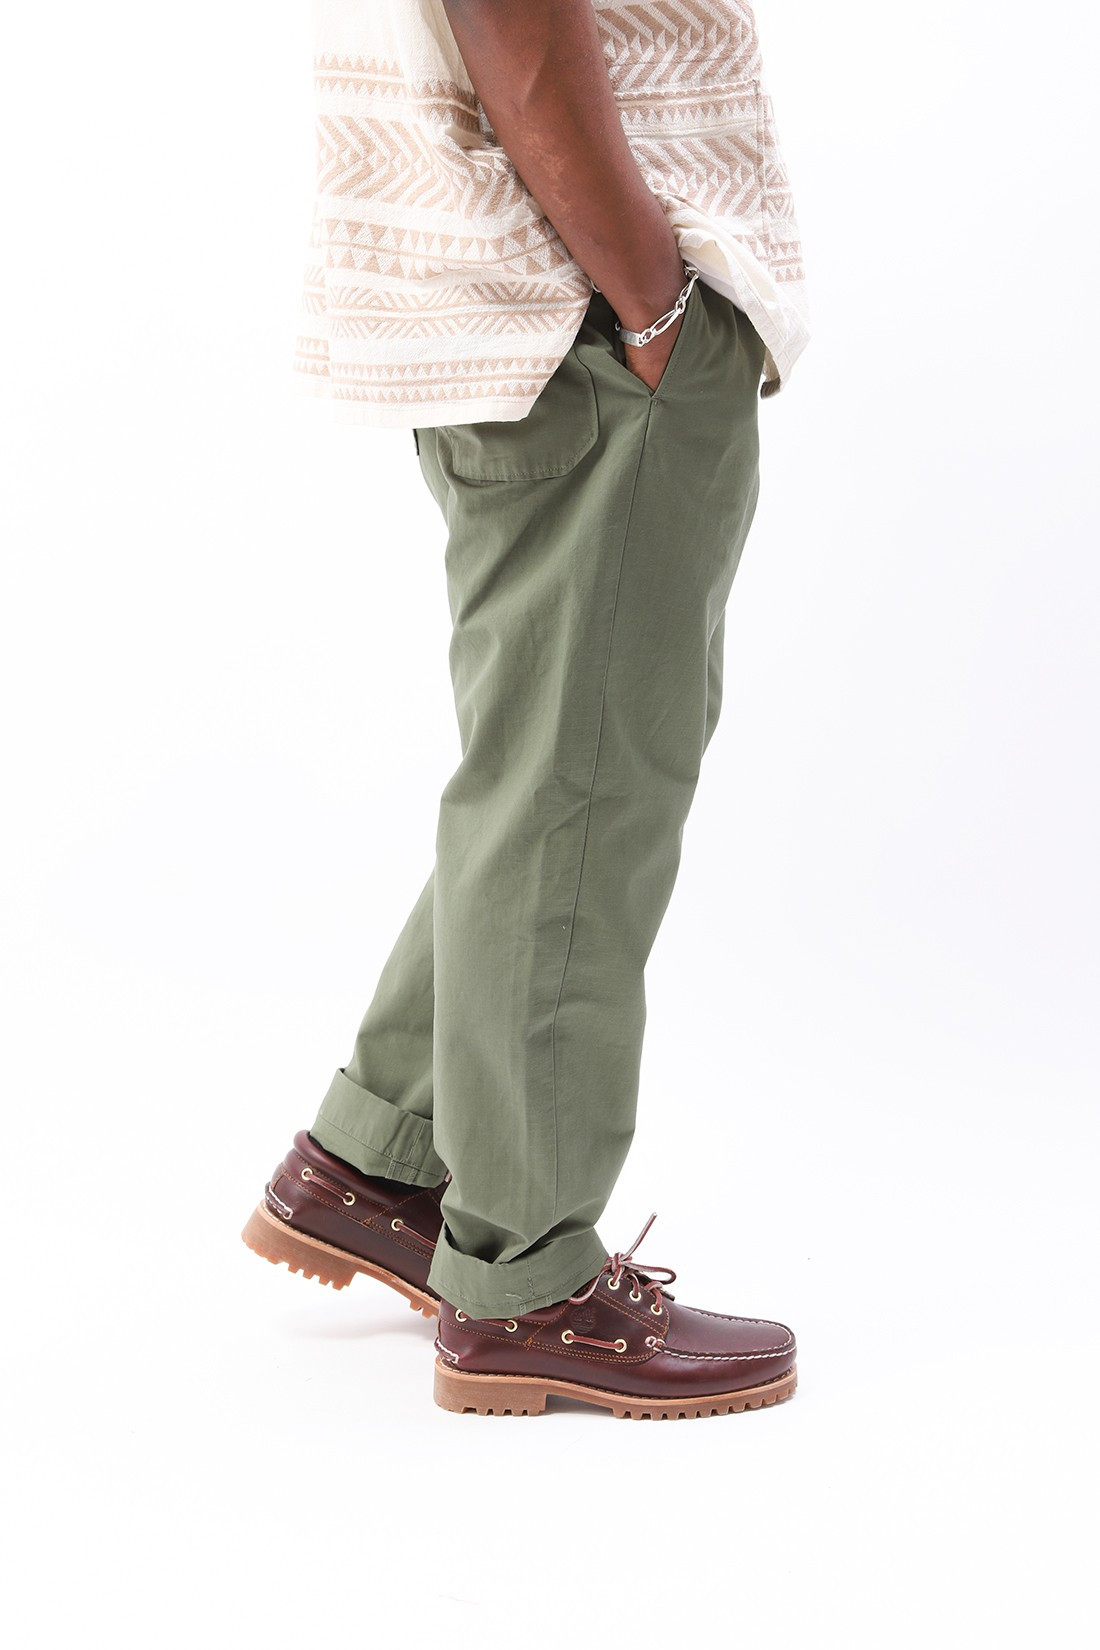 ENGINEERED GARMENTS / Carlyle pant olive cotton Ripstop